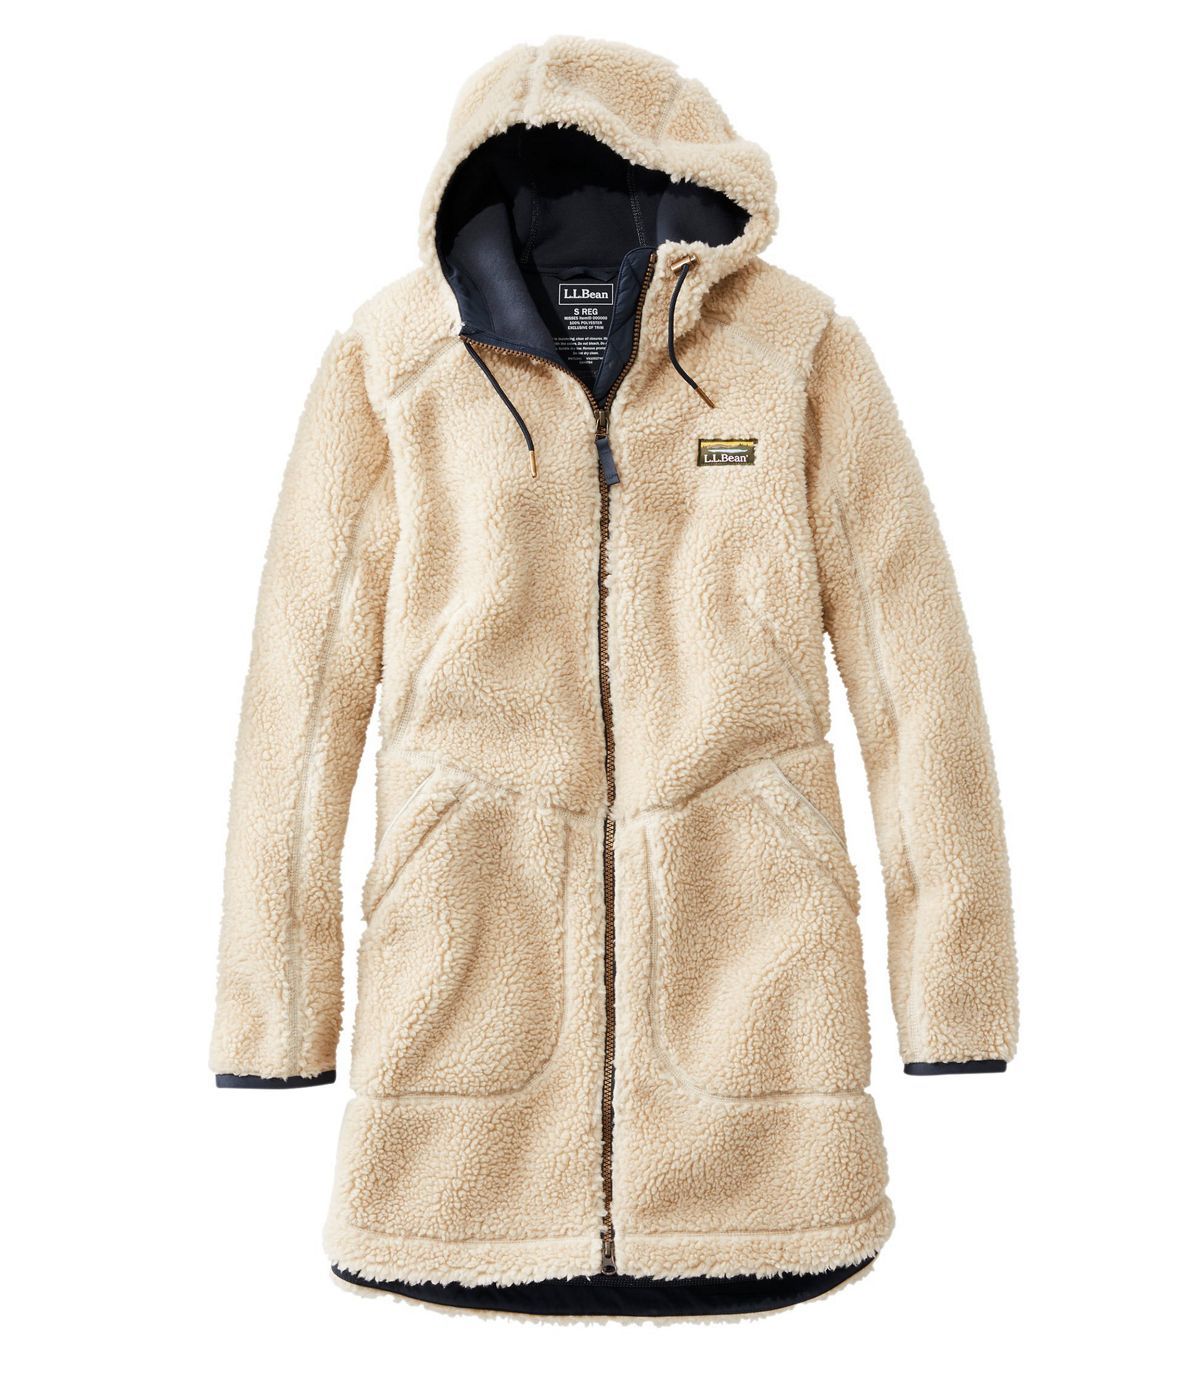 WAWAYA Mens Thicken Warm Winter Faux Fur Line Hooded Down Quilted Coat Jacket Outerwear